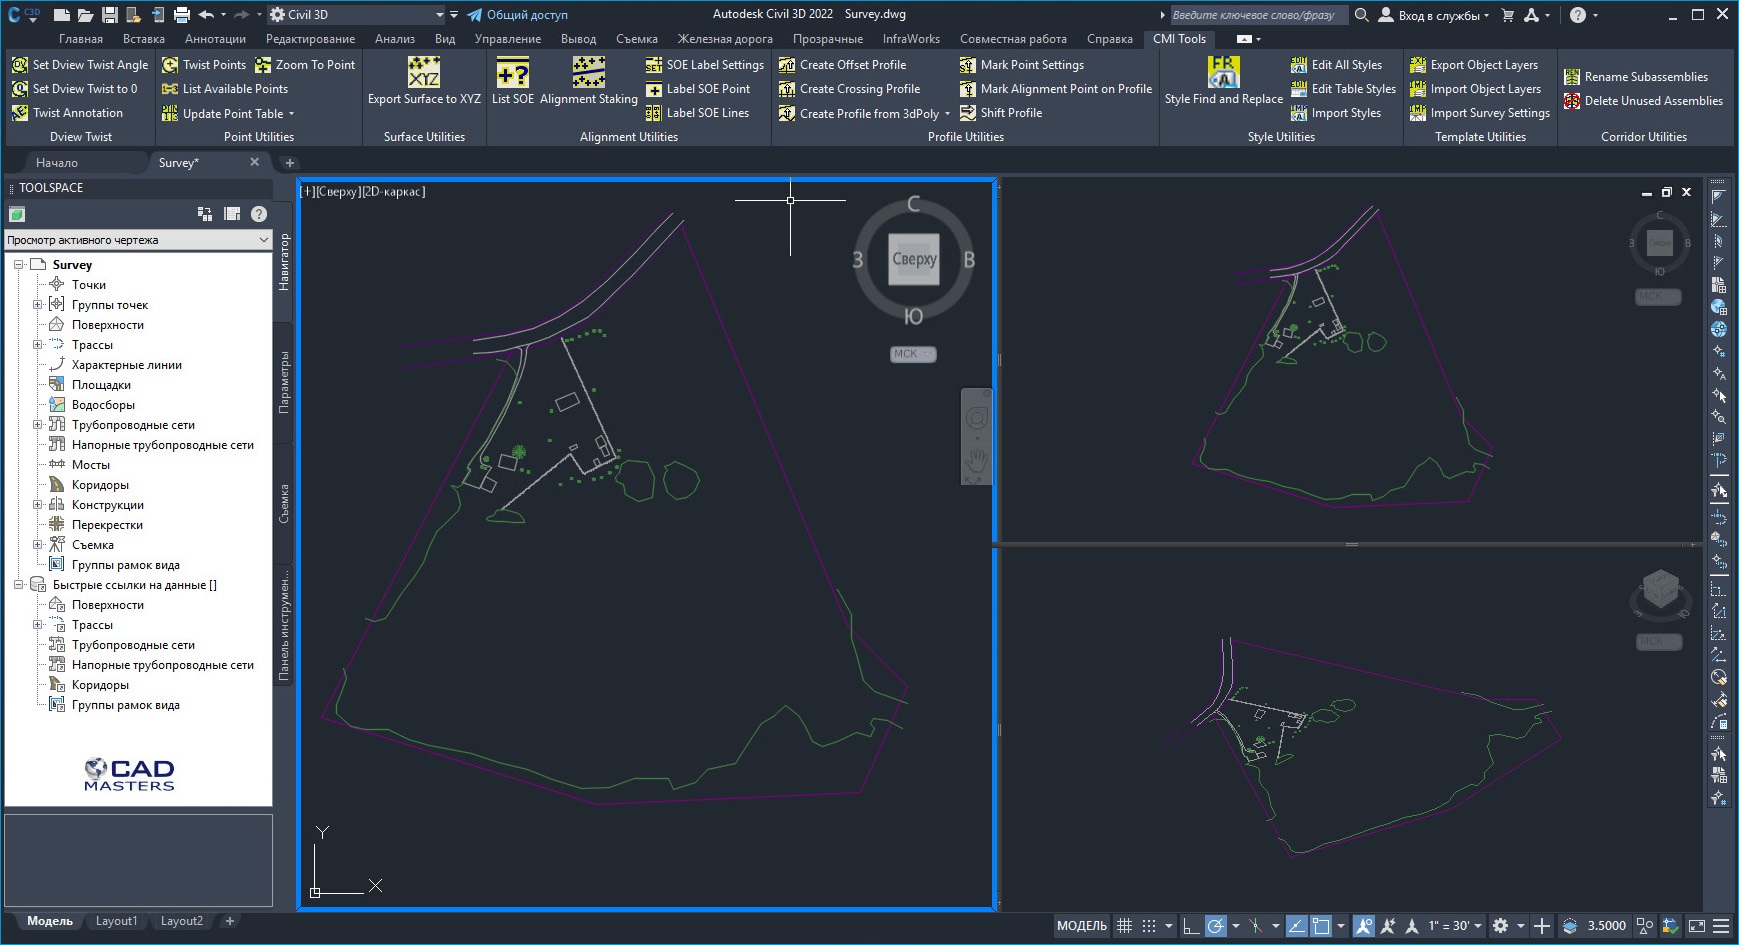 Working with CAD Masters CMI Tools for Civil 3D 2022 full